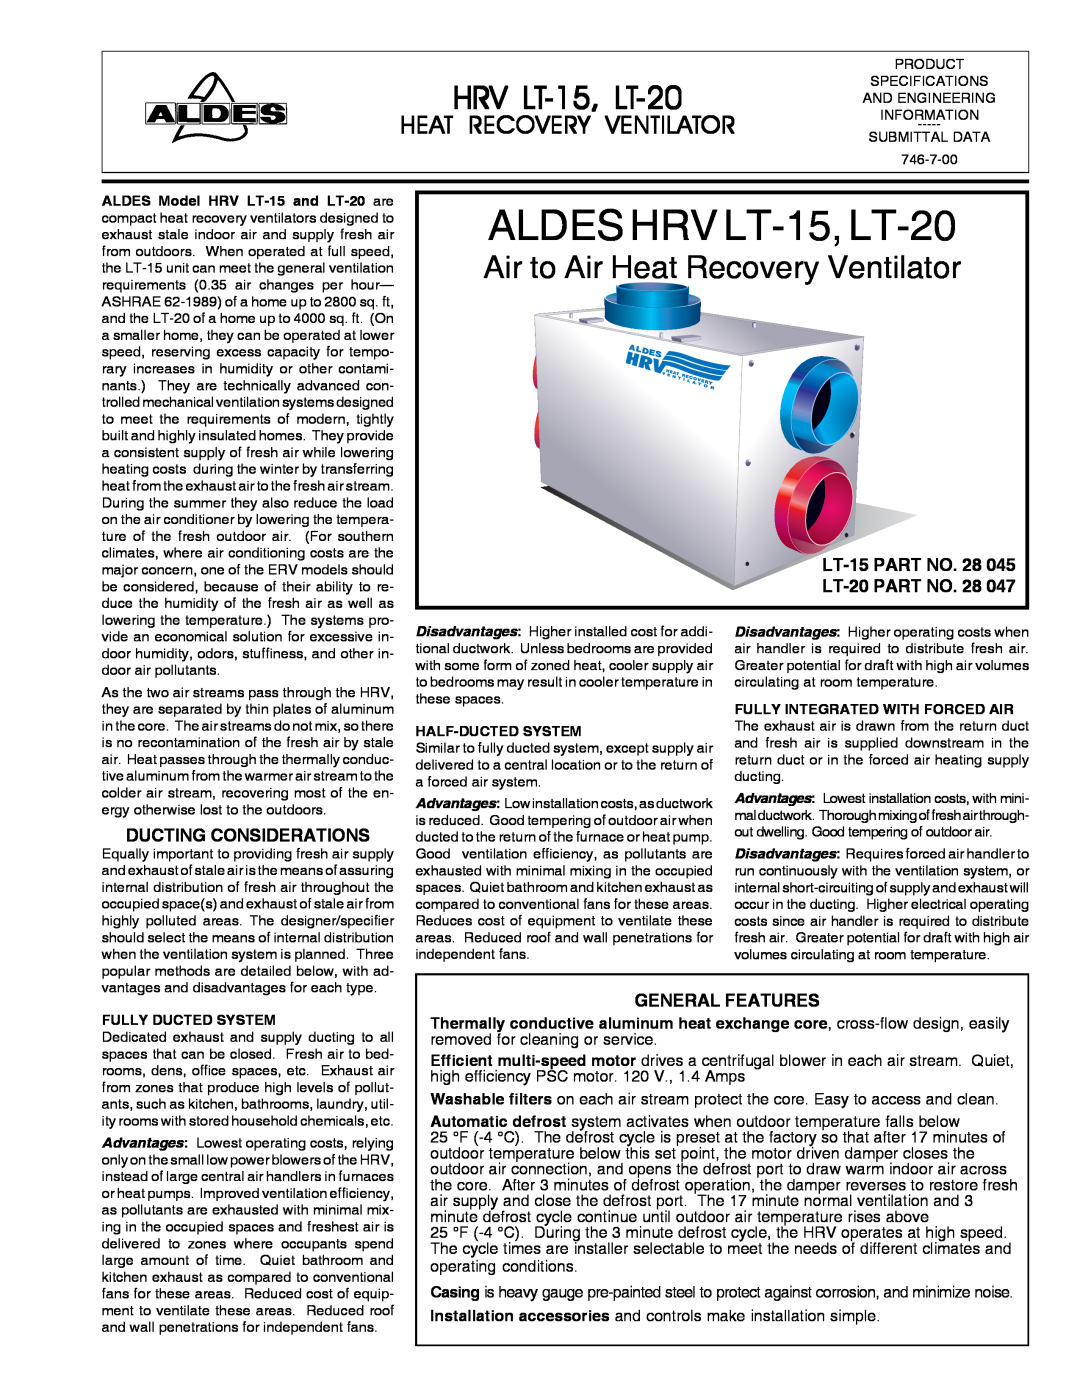 American Aldes specifications ALDES HRV LT-15, LT-20, Air to Air Heat Recovery Ventilator, LT-15PART NO. 28 